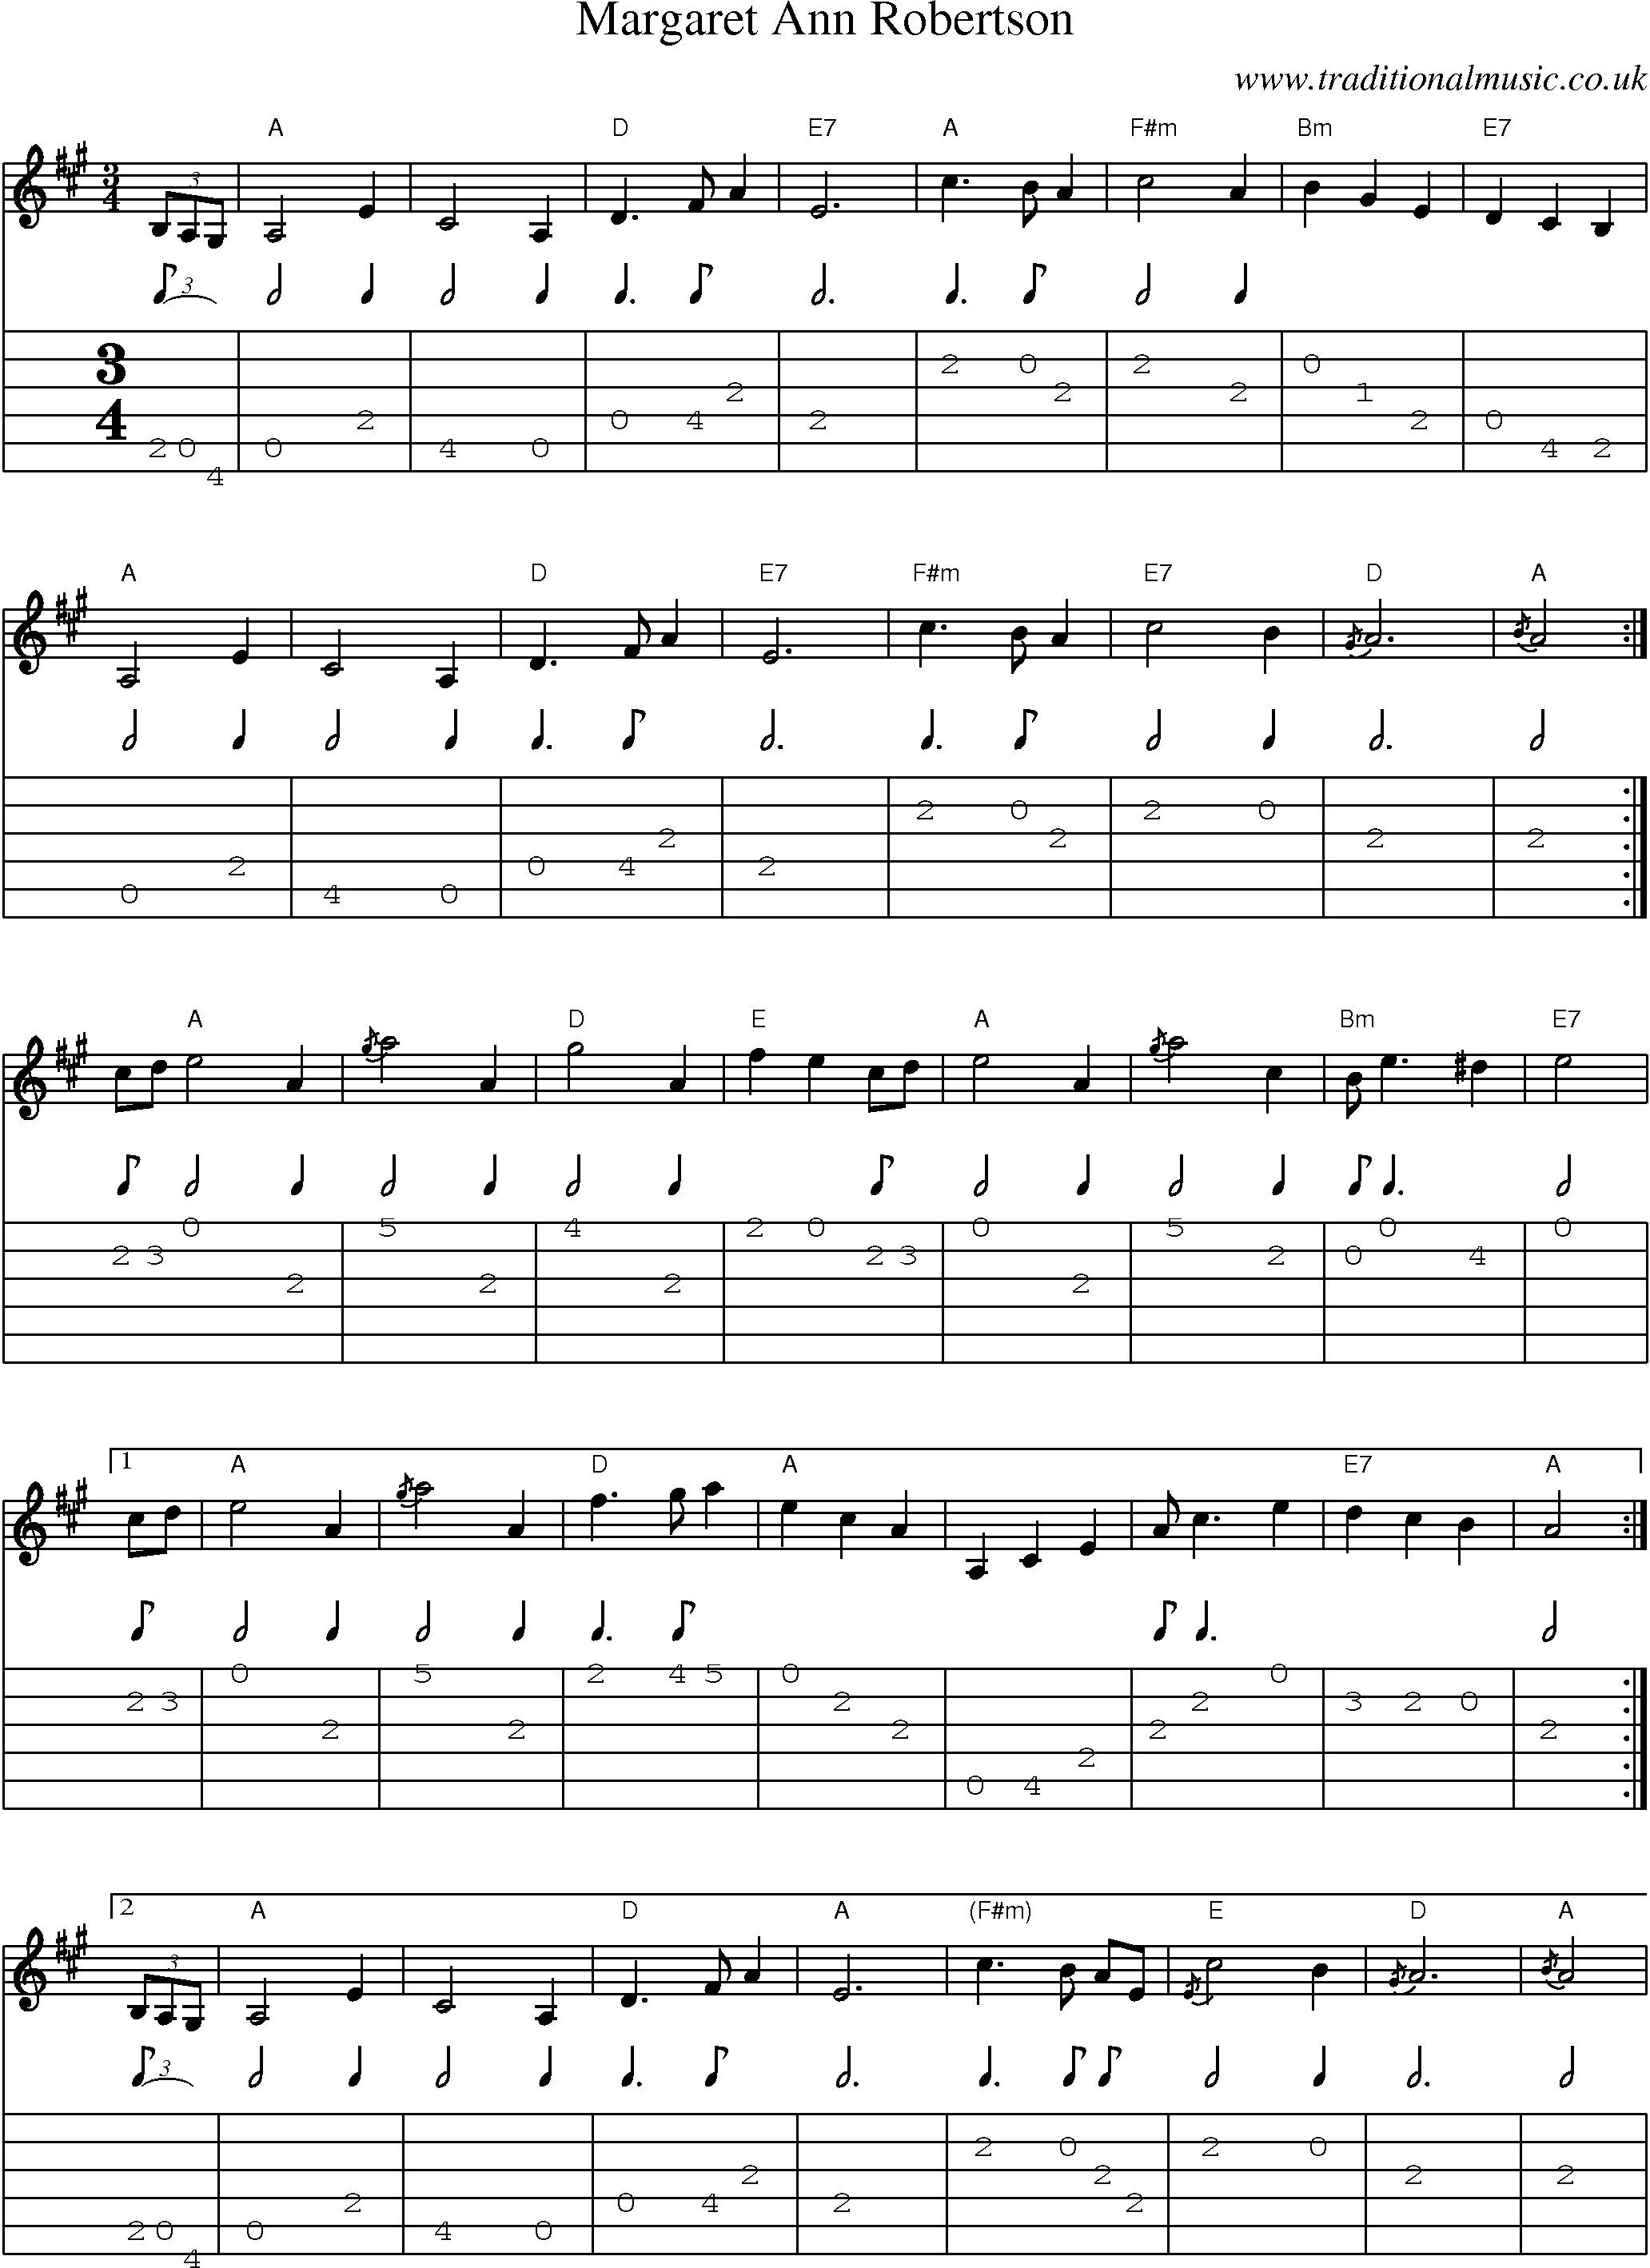 Music Score and Guitar Tabs for Margaret Ann Robertson